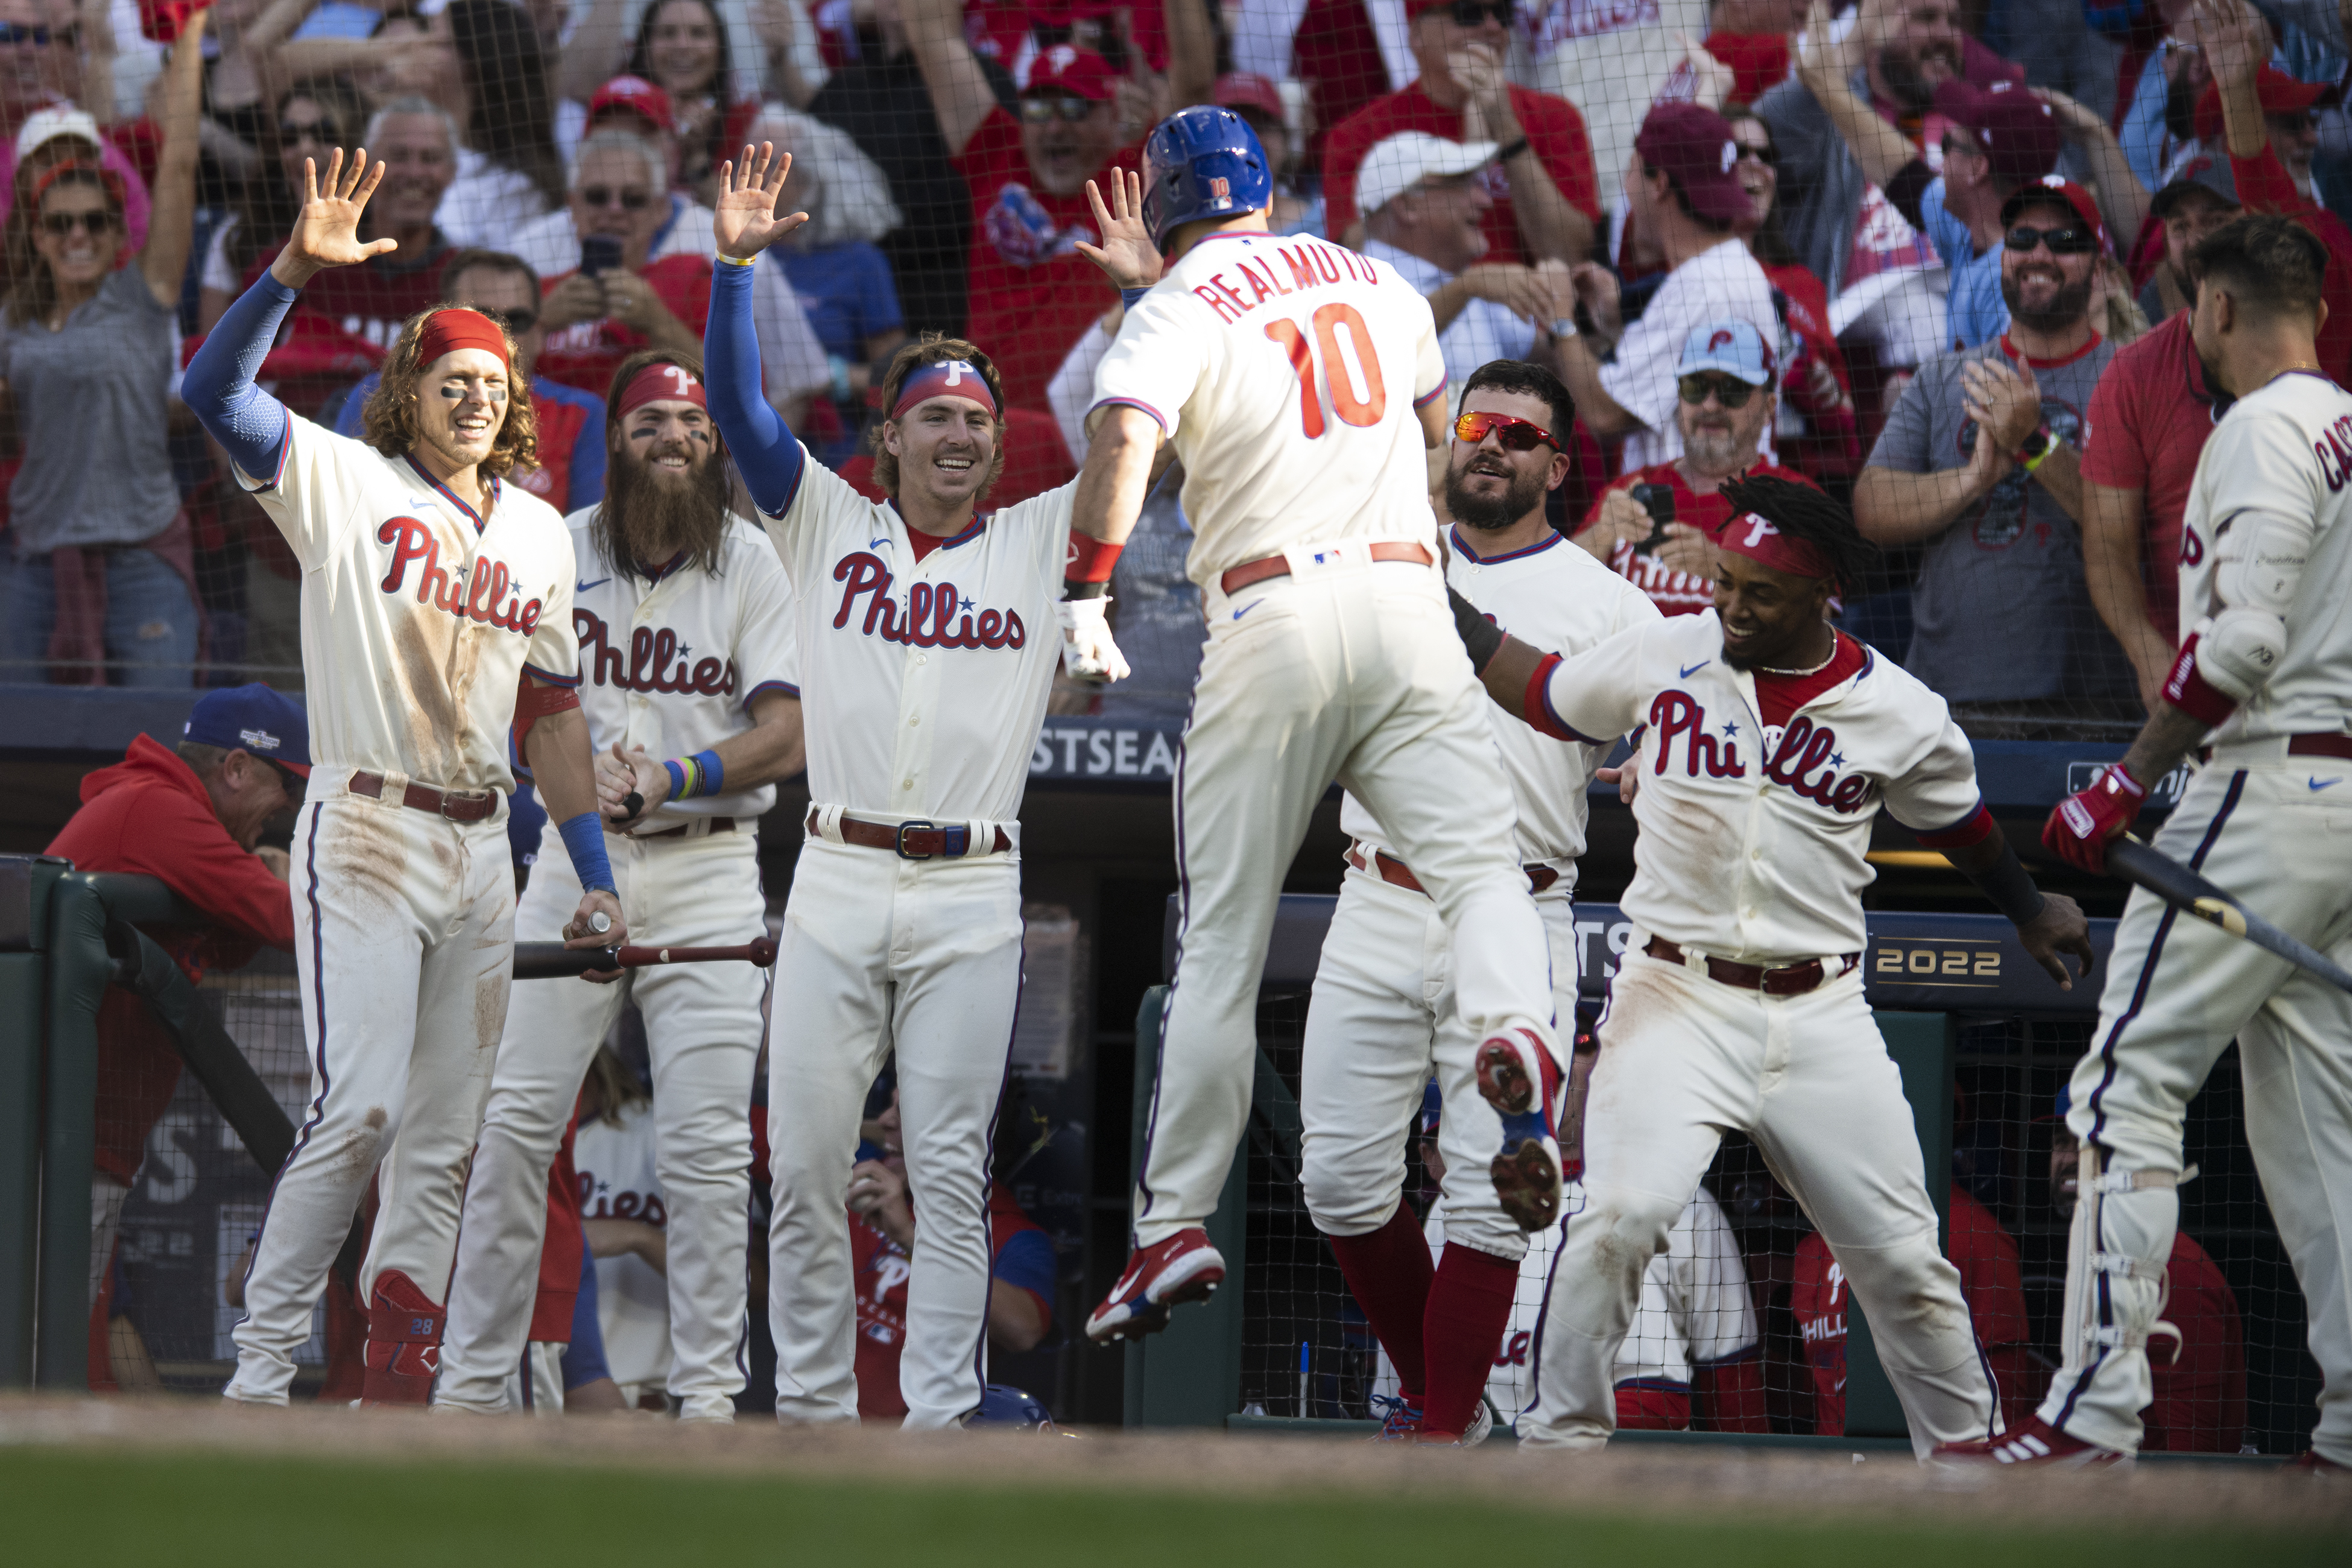 J.T. Realmuto helps Phillies reach NLCS with Christ at the center